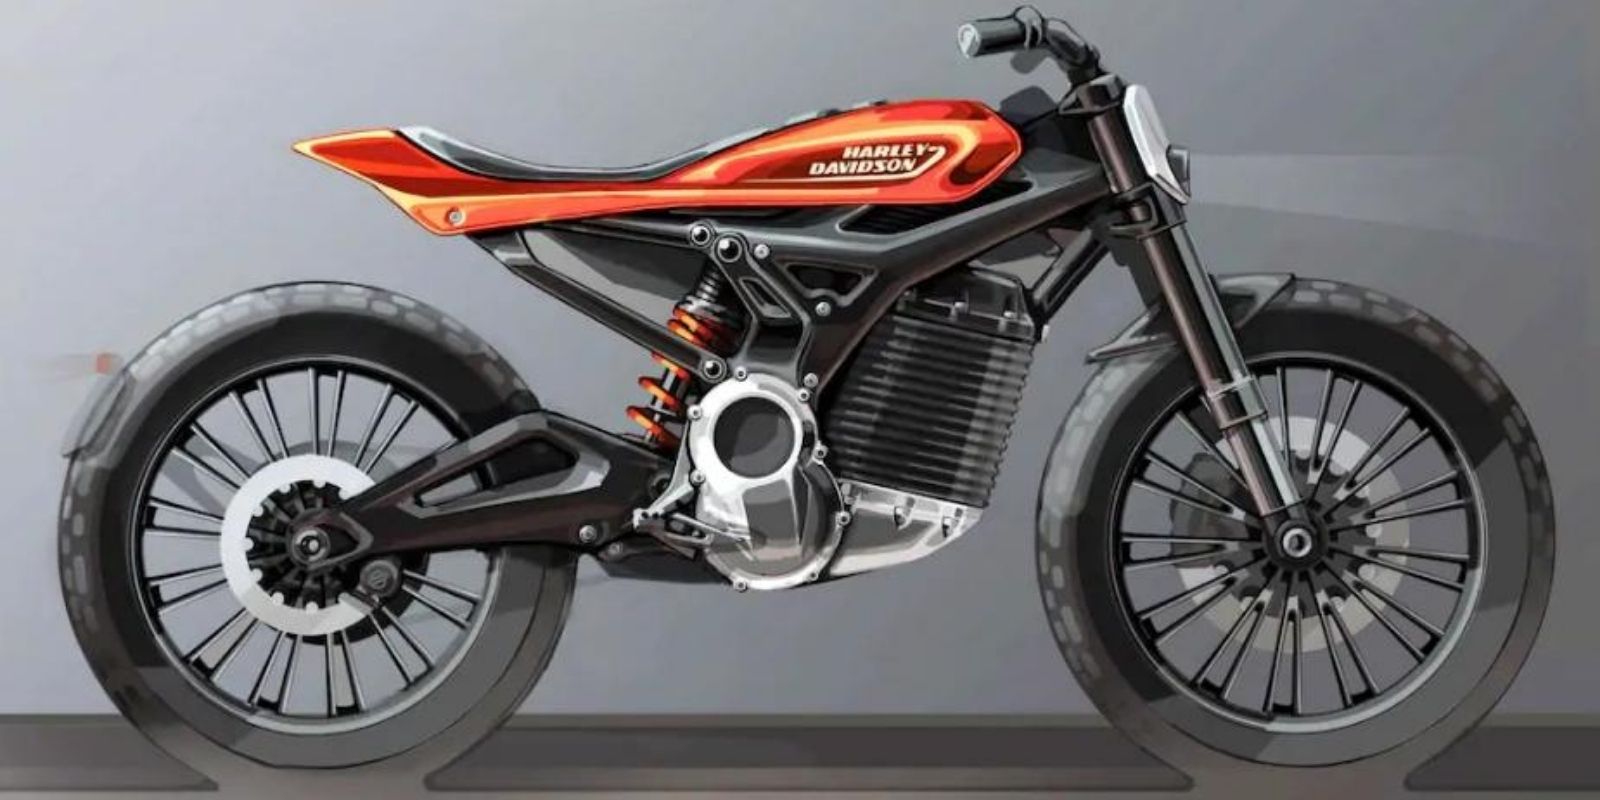 Harley Davidson Livewire One Electric Bike To Be Revealed On July 8